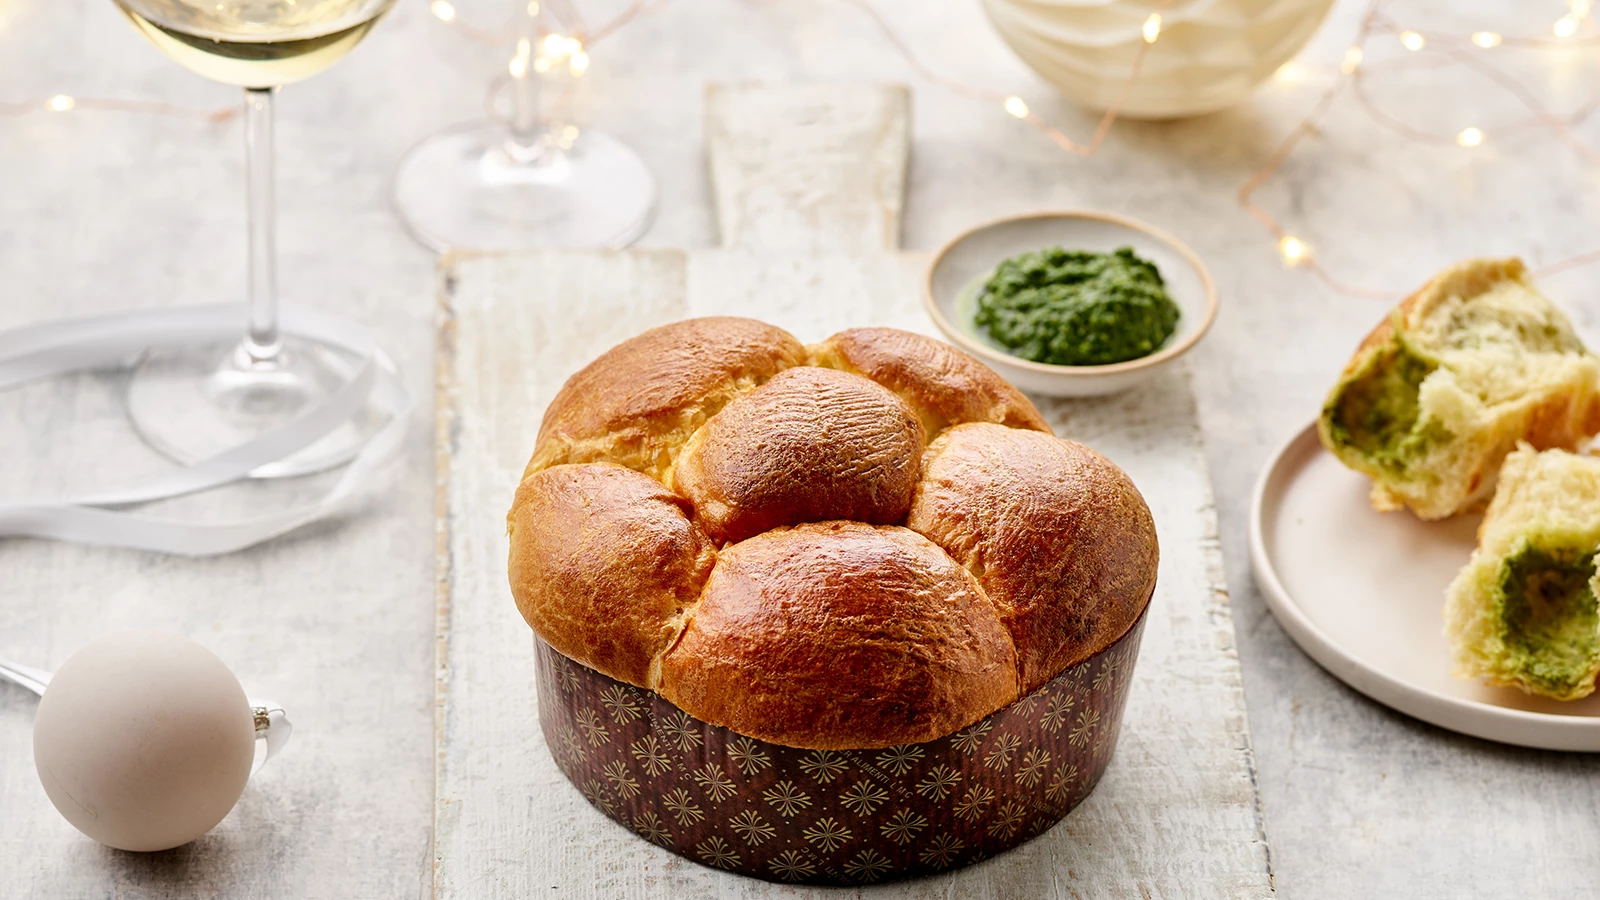 Tear & Share brioche intact in its paper case with a glass of white wine